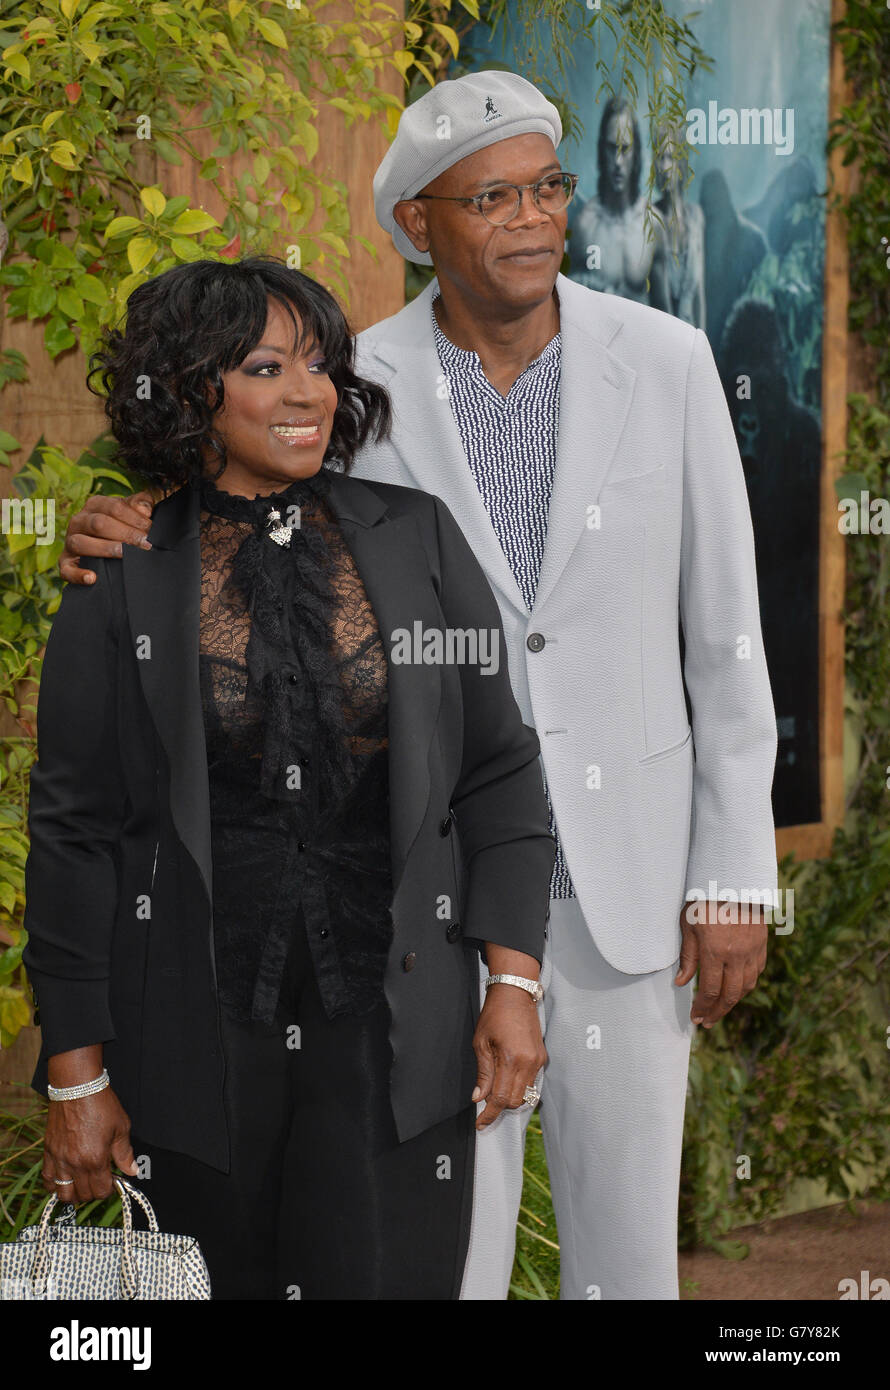 Los Angeles, USA. 27th June, 2016. LOS ANGELES, CA. June 27, 2016: Actor Samuel L. Jackson & wife actress LaTanya Richardson Jackson at the world premiere of 'The Legend of Tarzan' at the Dolby Theatre, Hollywood. Credit:  Sarah Stewart/Alamy Live News Stock Photo